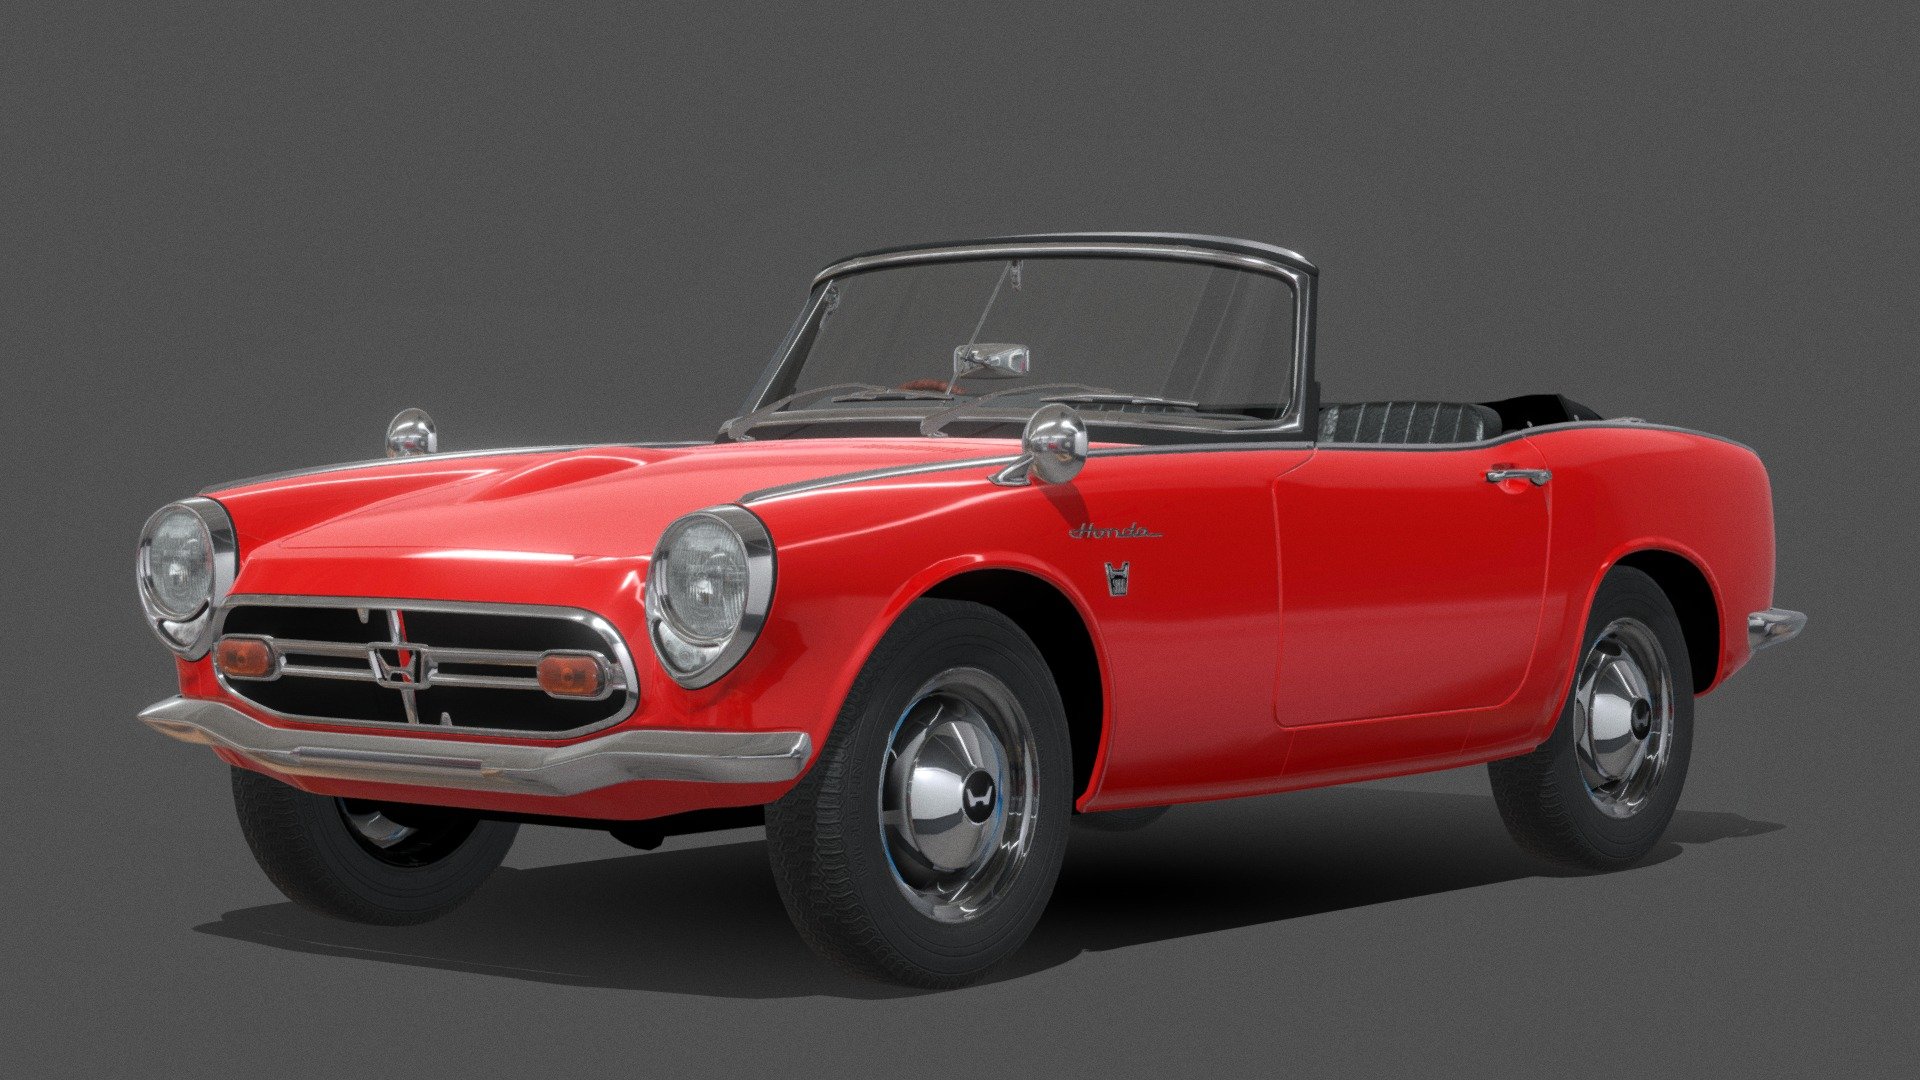 The S800 was available as either a coupe or roadster, and continued the advanced technology of its predecessors. The 791 cc straight-4 high reving engine.

modeled in blender and textured using substance painter

Like if you download, and feel free to comment any suggestions - Honda s800 - Download Free 3D model by Alexios Apokaukos (@Alexios_Apokaukos) 3d model